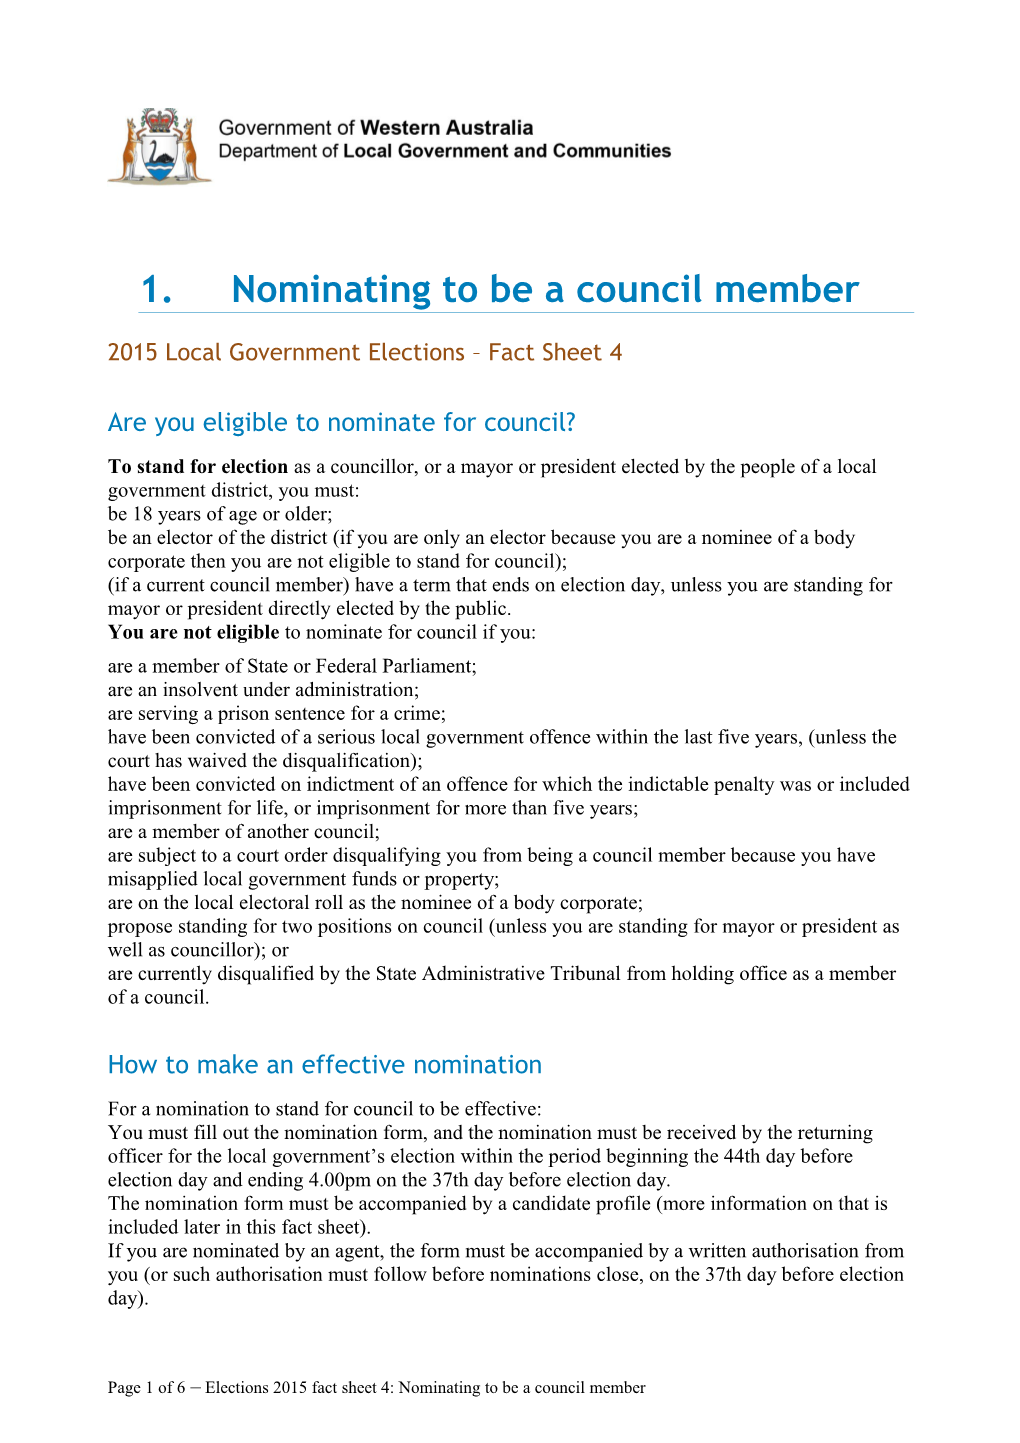 2015 Local Government Elections Fact Sheet 4 - Nominating to Be a Council Member